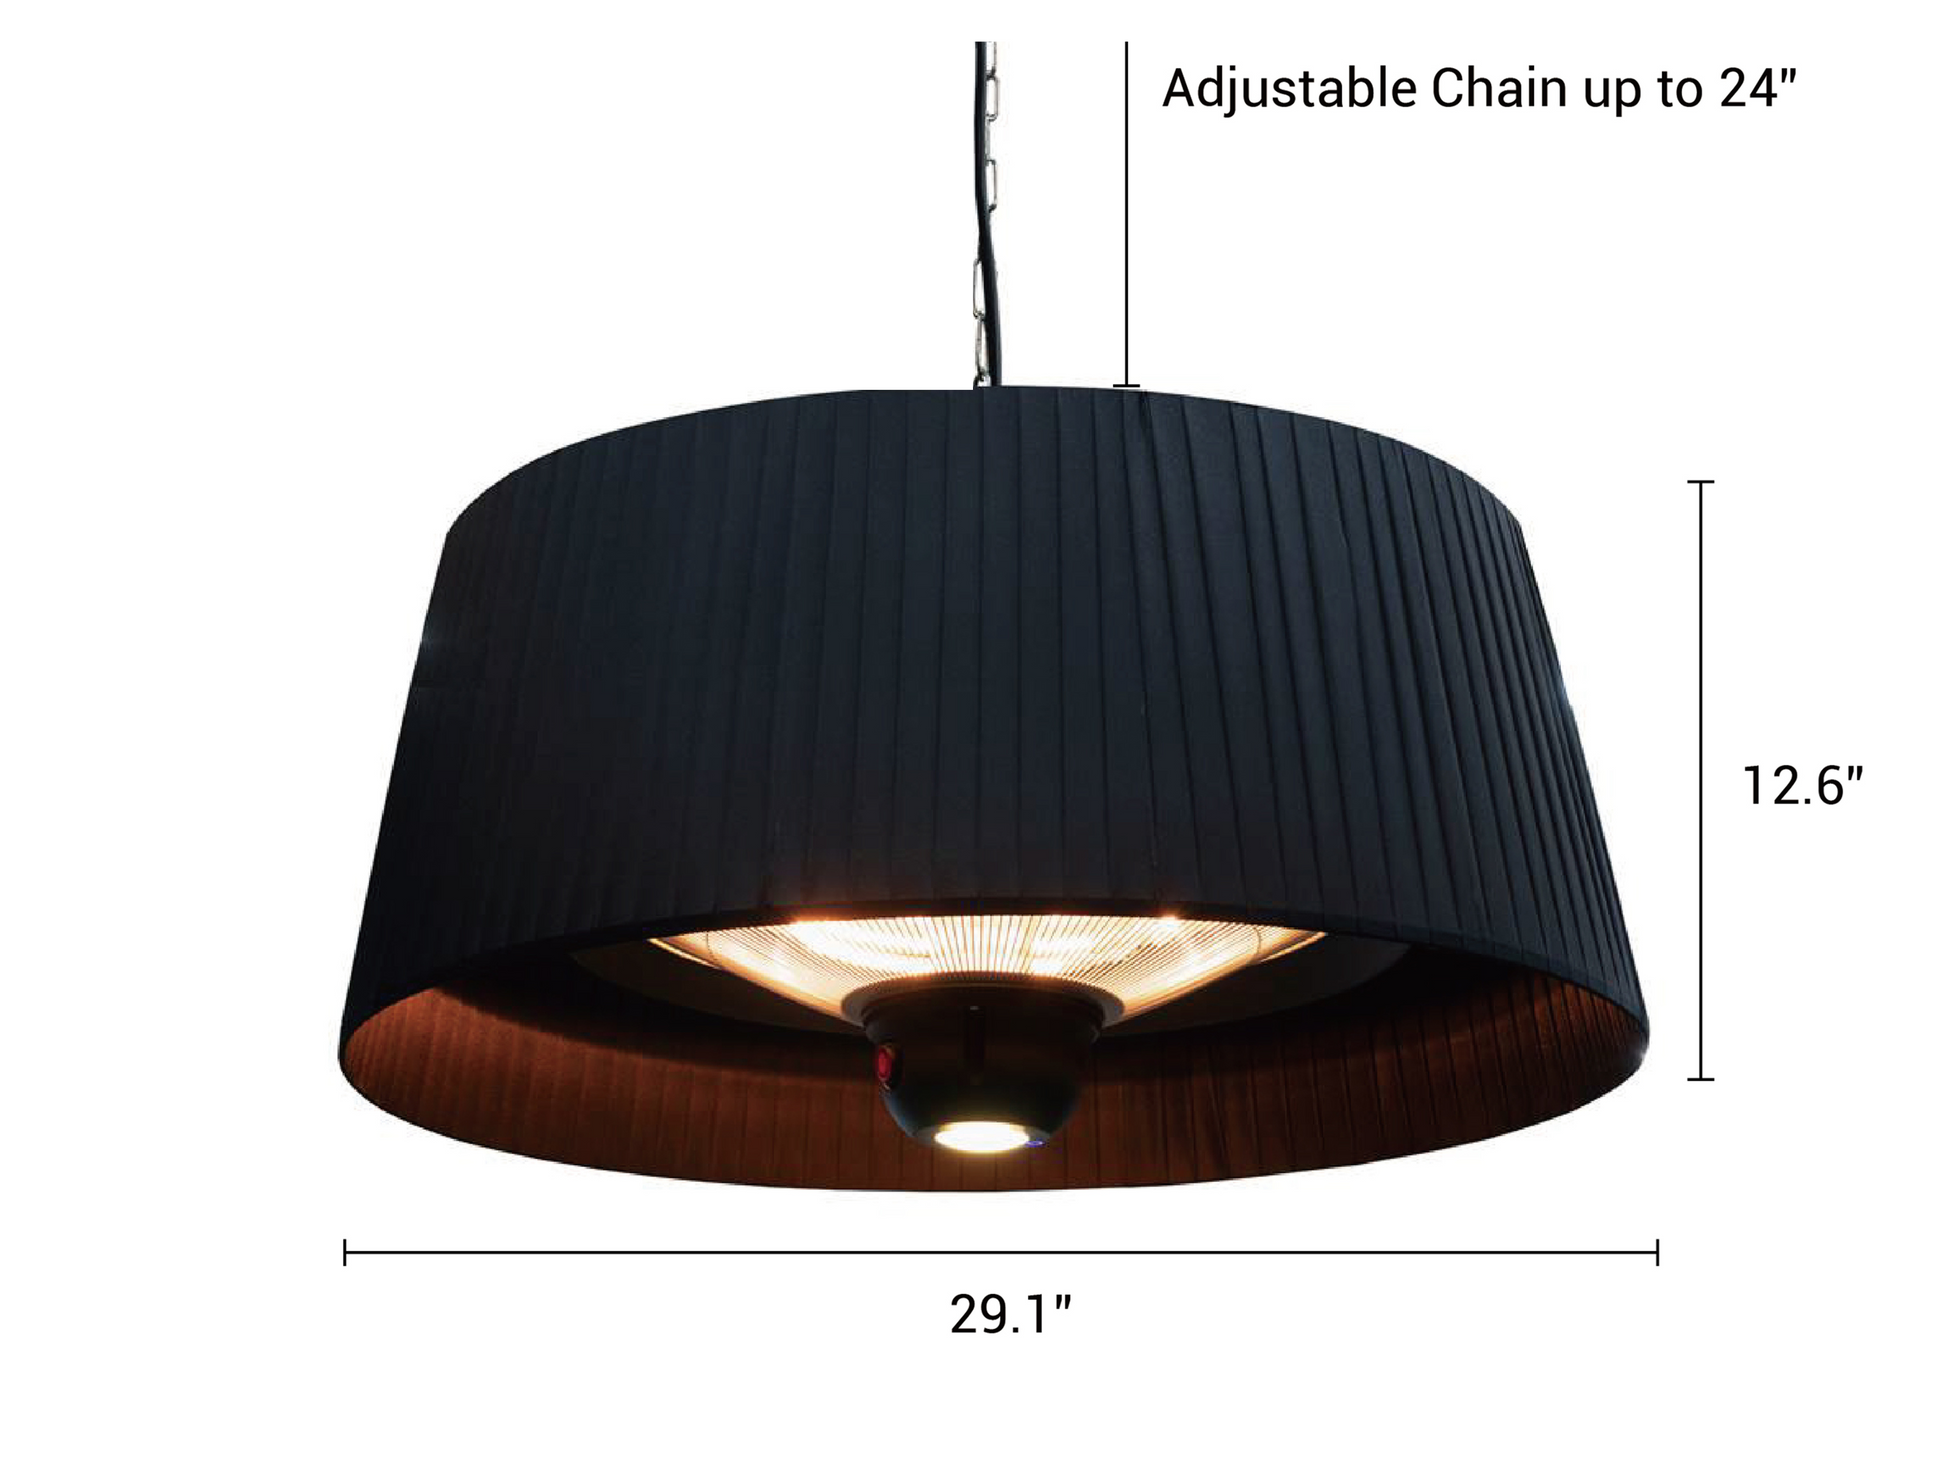 Glow Pendent Heater with dimensions, 12.6" Tall, 29.1" Wide with 24" adjustable chain